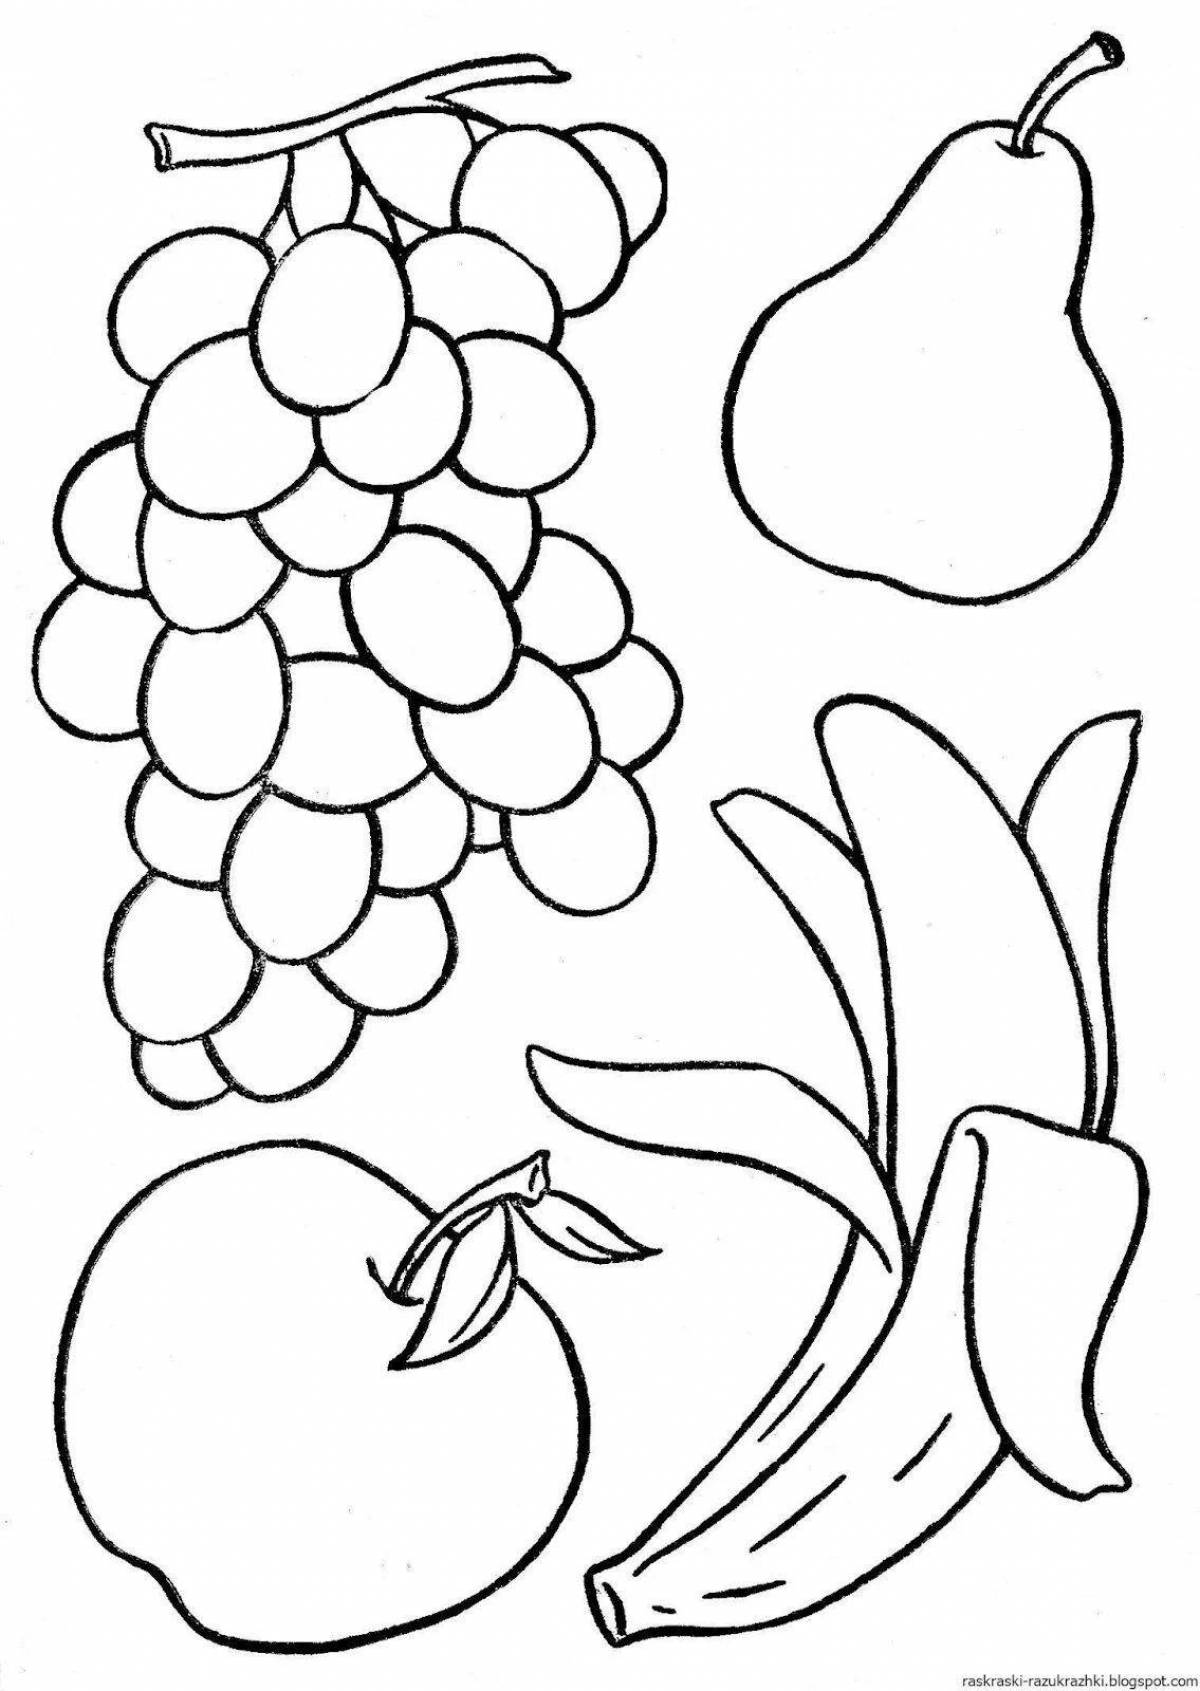 Glorious fruits and vegetables coloring pages for kids